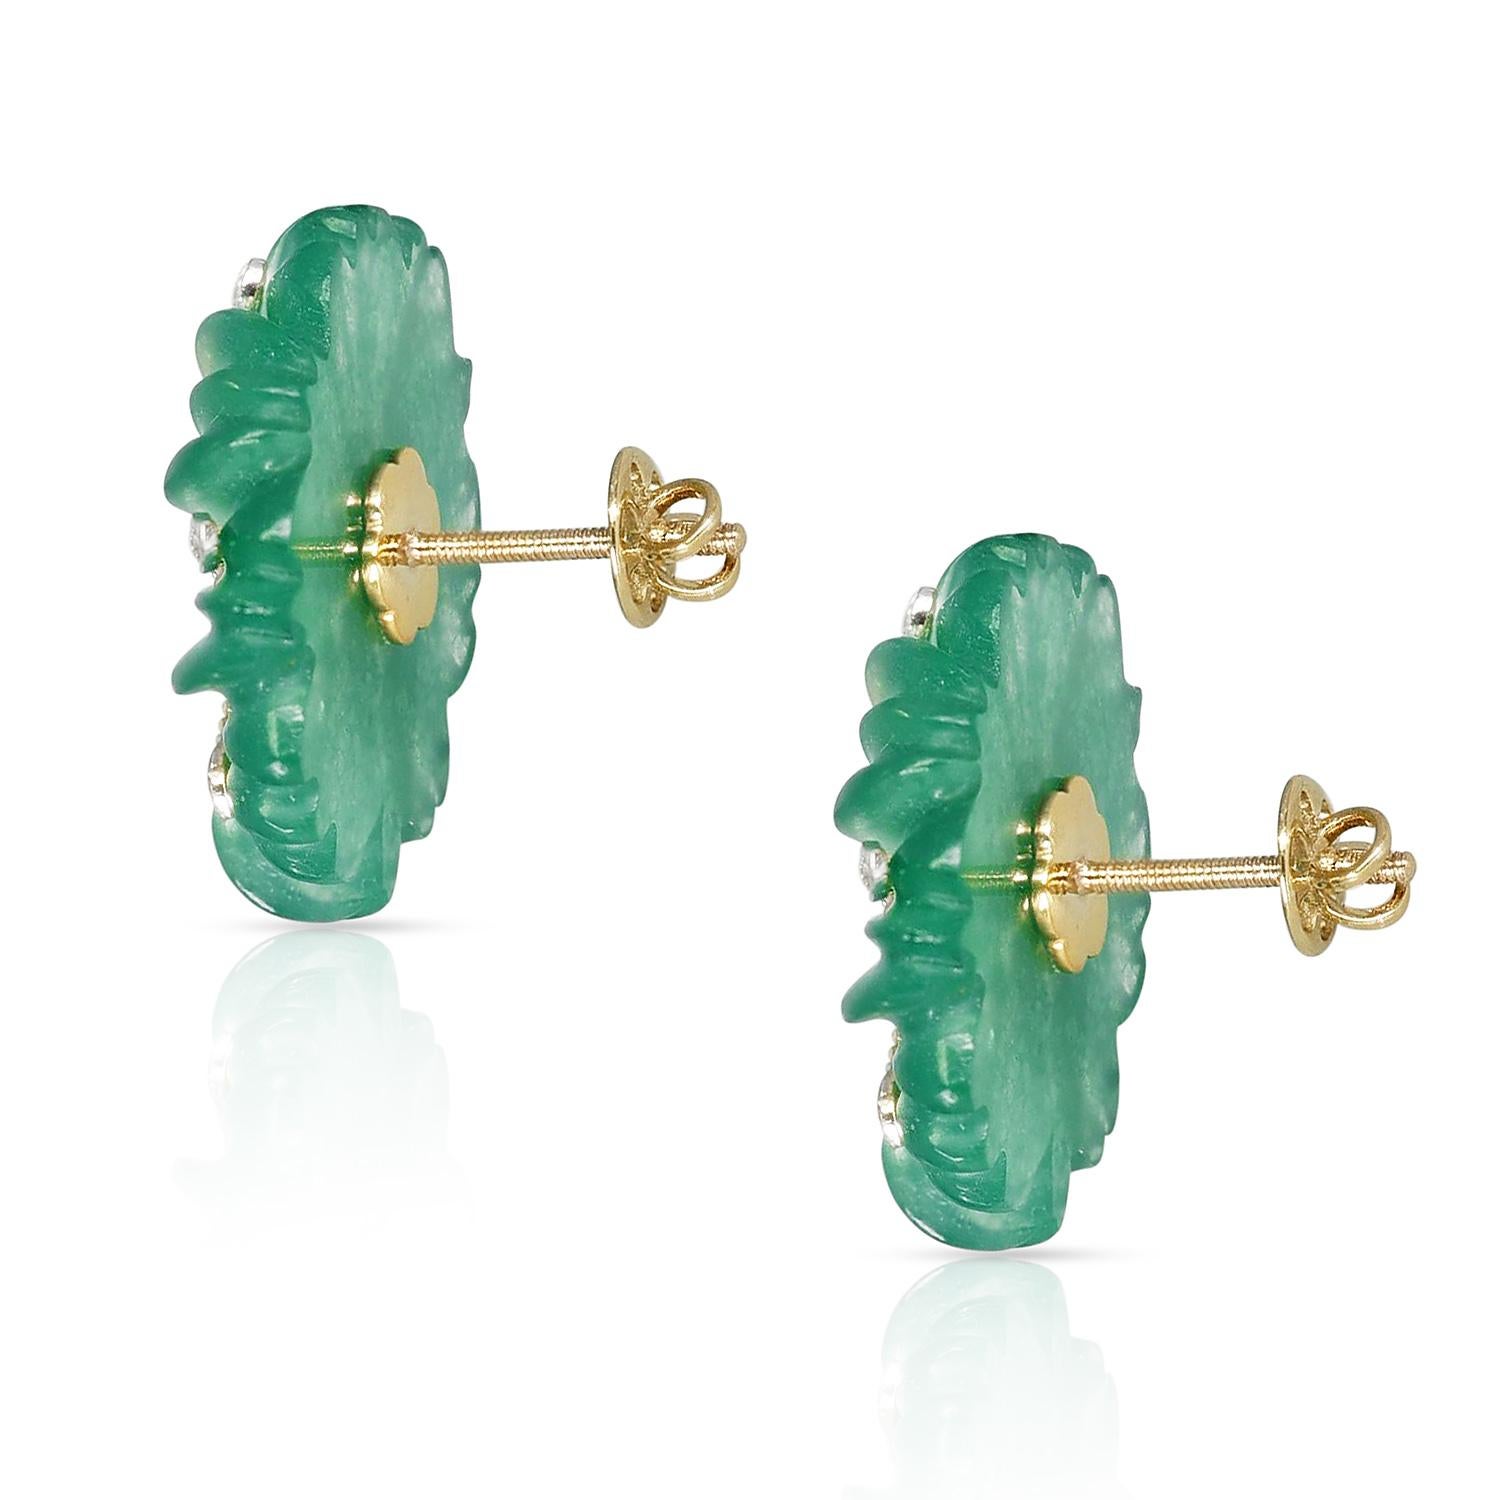 A beautiful pair of carved Jade earrings in an oval shape with a floral design made up of white and yellow gold with diamonds. Diamond Weight:  0.13 cts, Jade Weight: 33.11  cts. 14K Gold. Total Weight: 9.52 grams. Matching Pendant available.